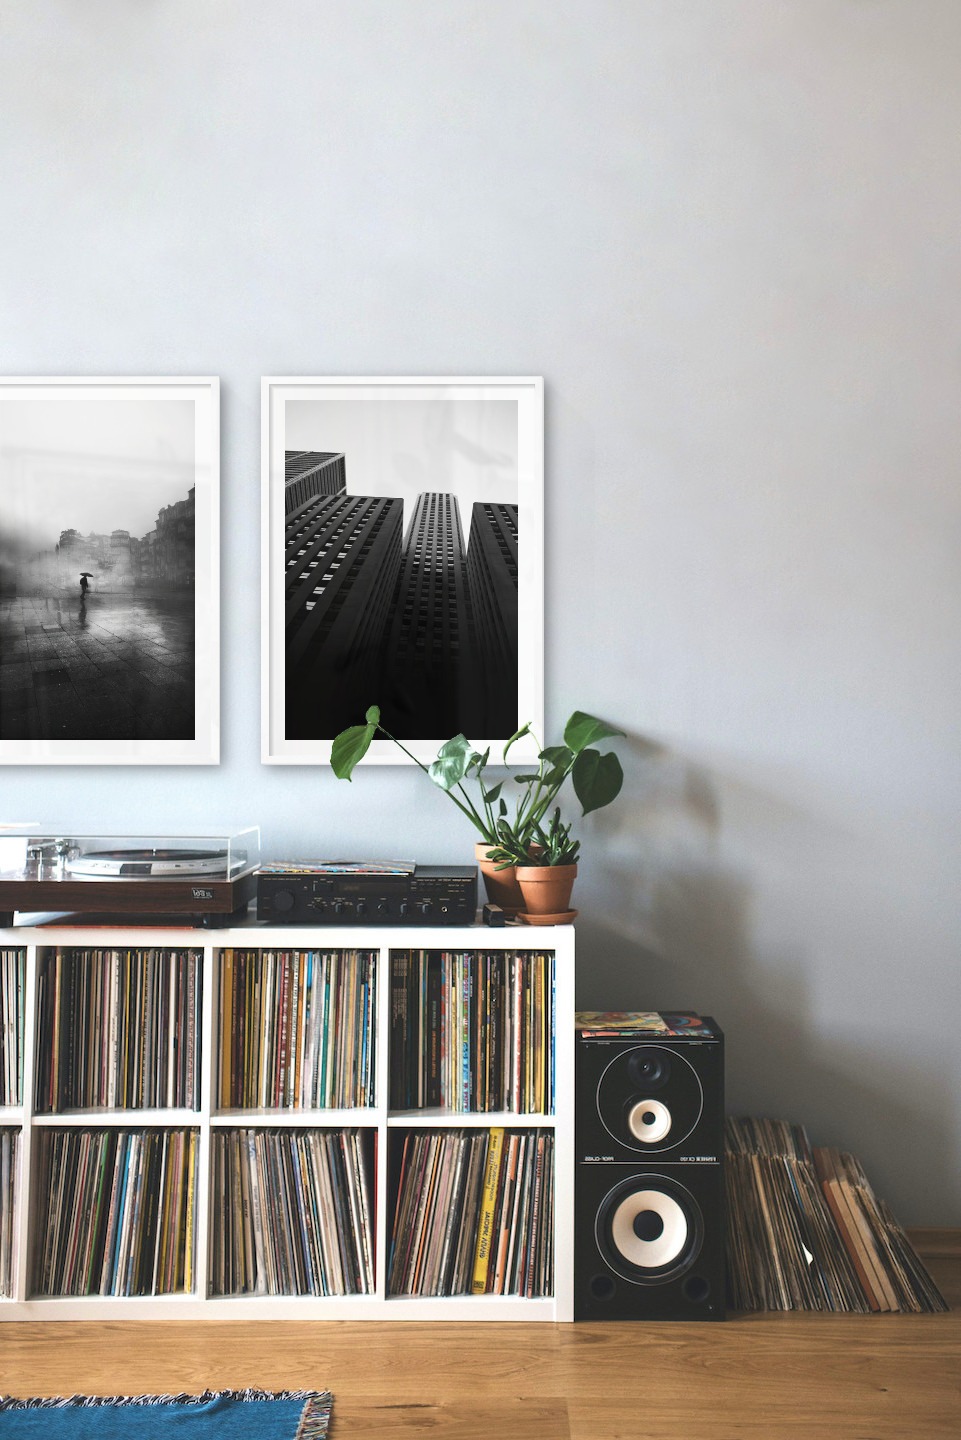 Gallery wall with picture frames in white in sizes 50x70 with prints "Rainy city" and "High buildings"